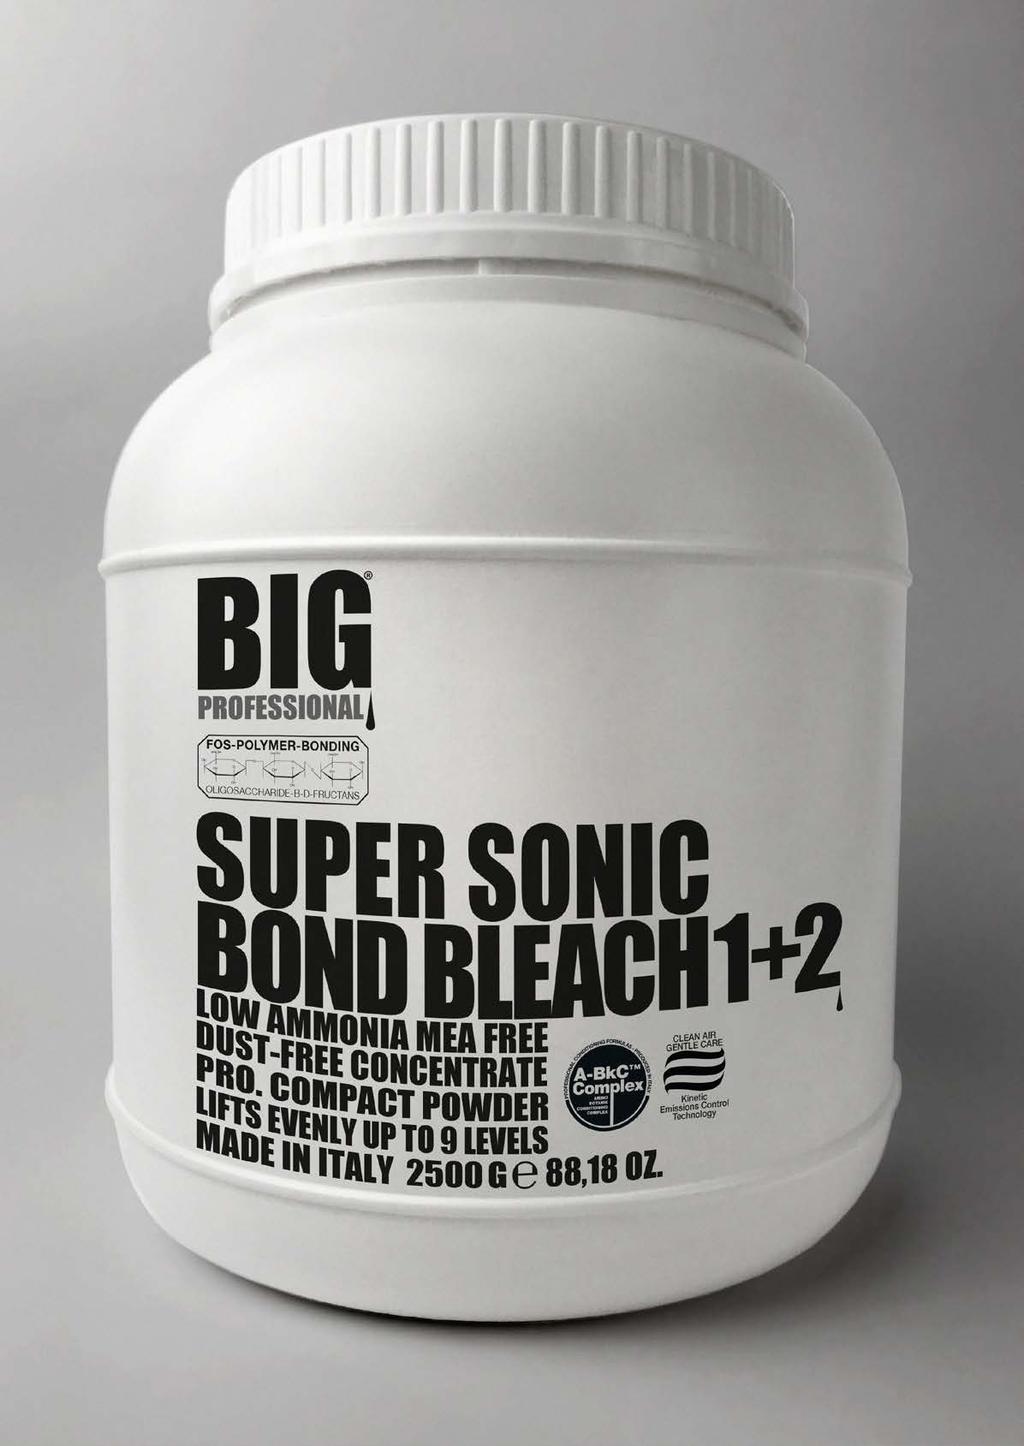 SUPER SONIC BOND BLEACH 1+2 Bleaches While Regenerating The Hair Fiber Restructures For Stronger, Healthier Hair Hydrates For More Elasticity Even & Consistant Results Less Agressive Maximum